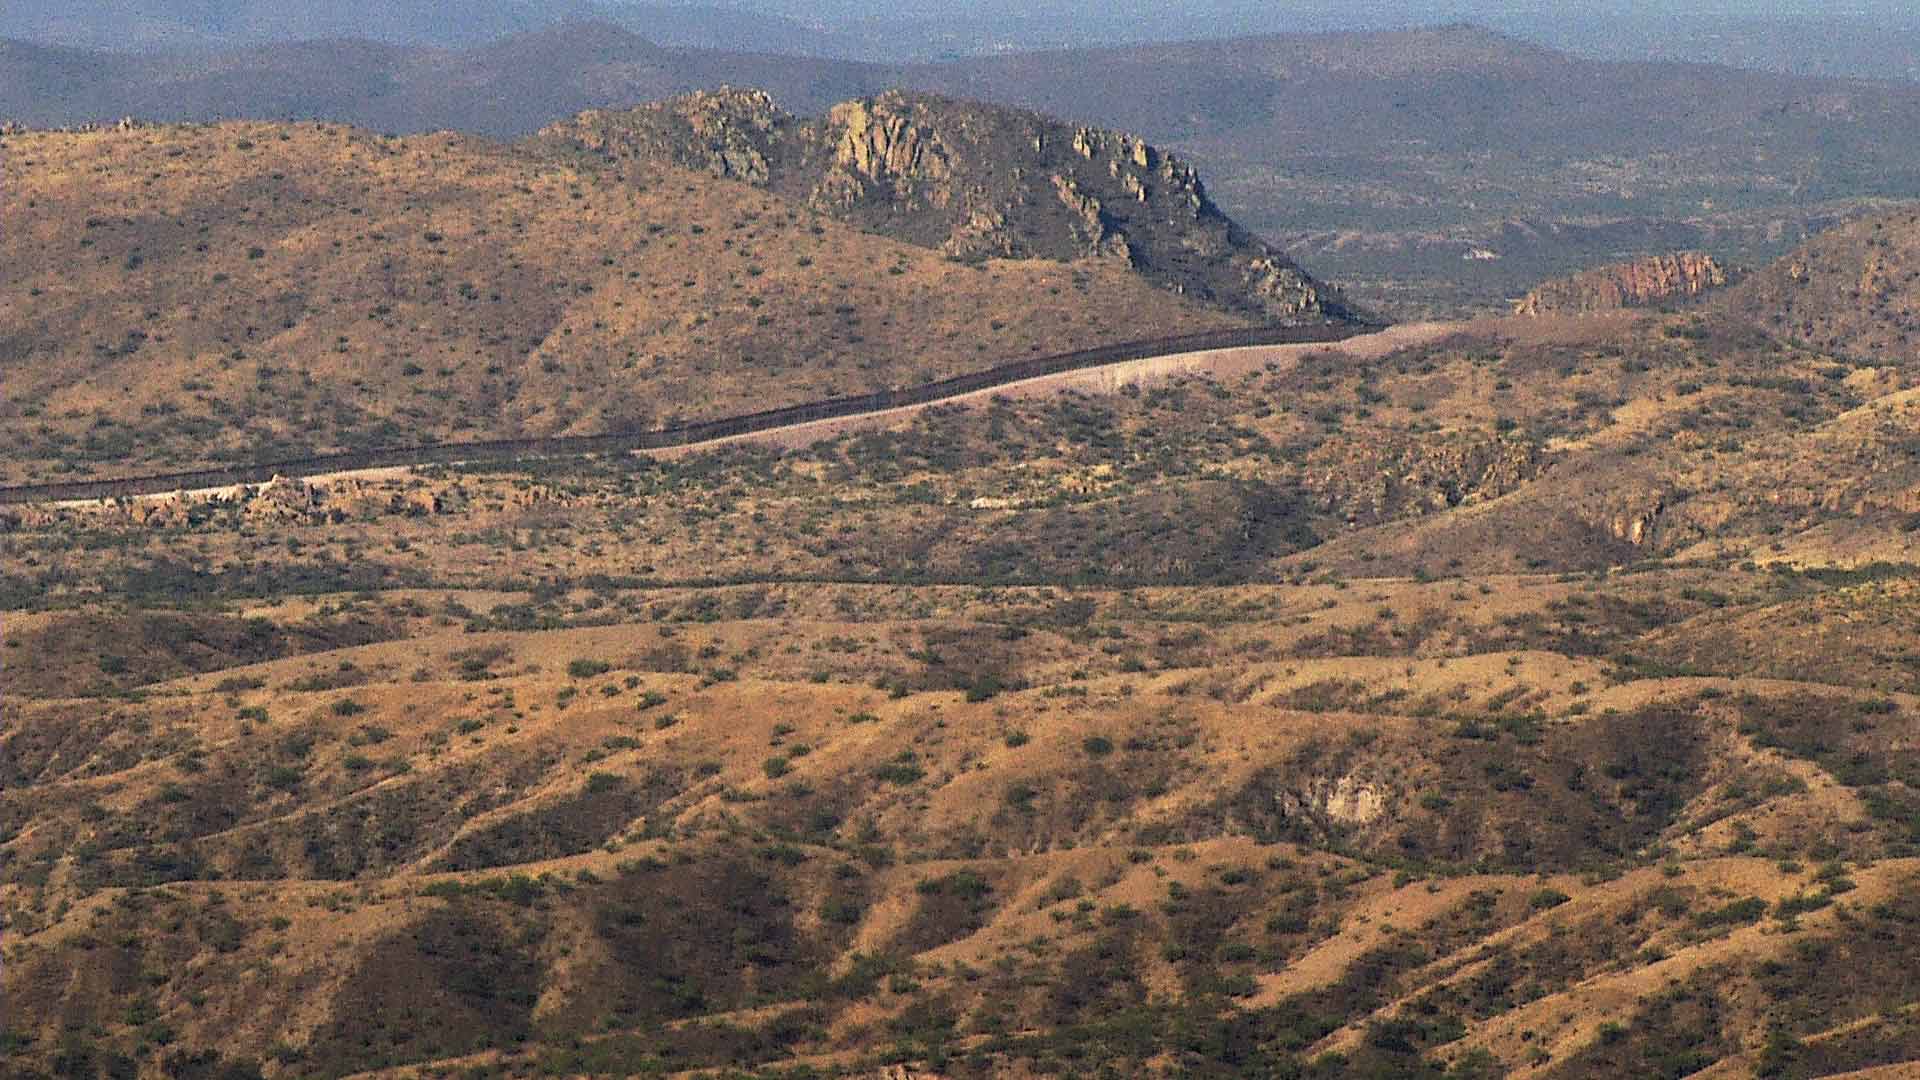 A few of the Arizona-Mexico border from a helicopter operated by Customs and Border Protection's Air and Marine Operations. June 2021.